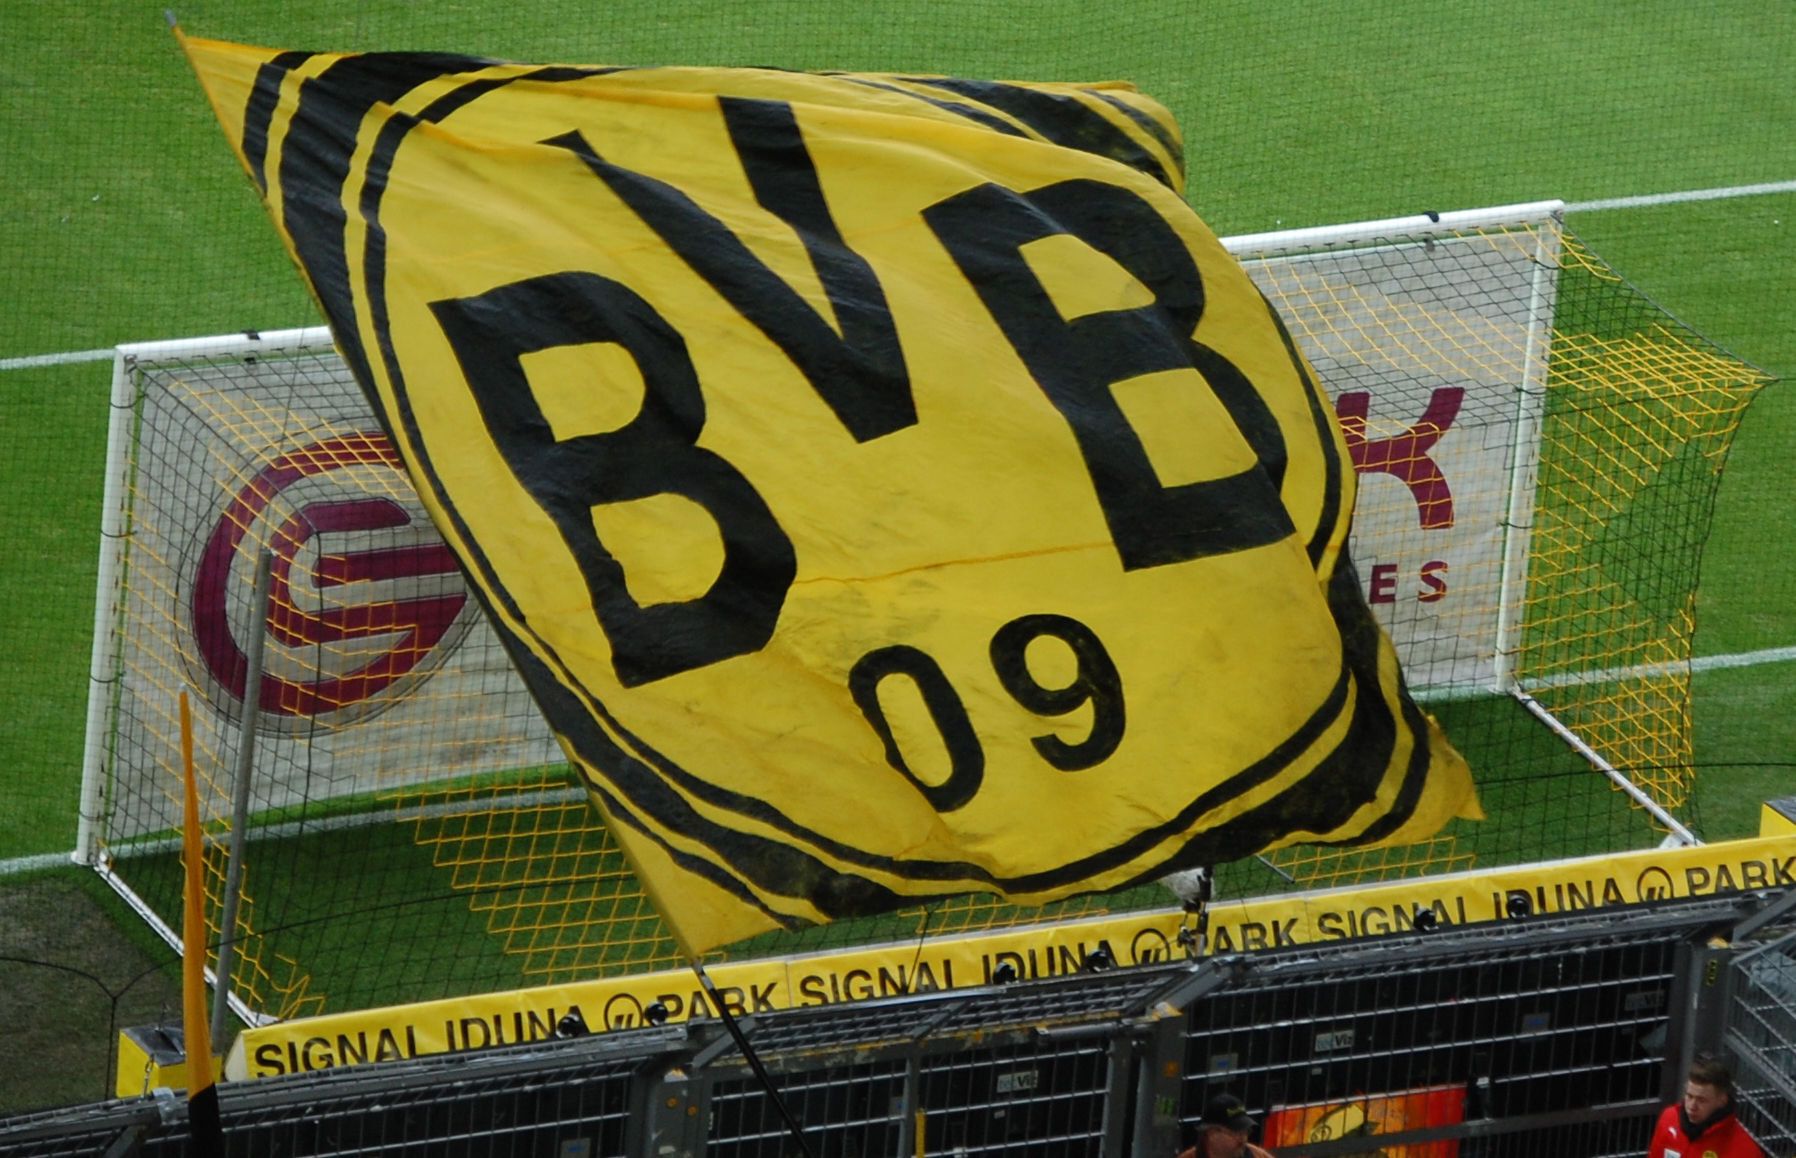 Borussia Dortmund - one of several great German football clubs